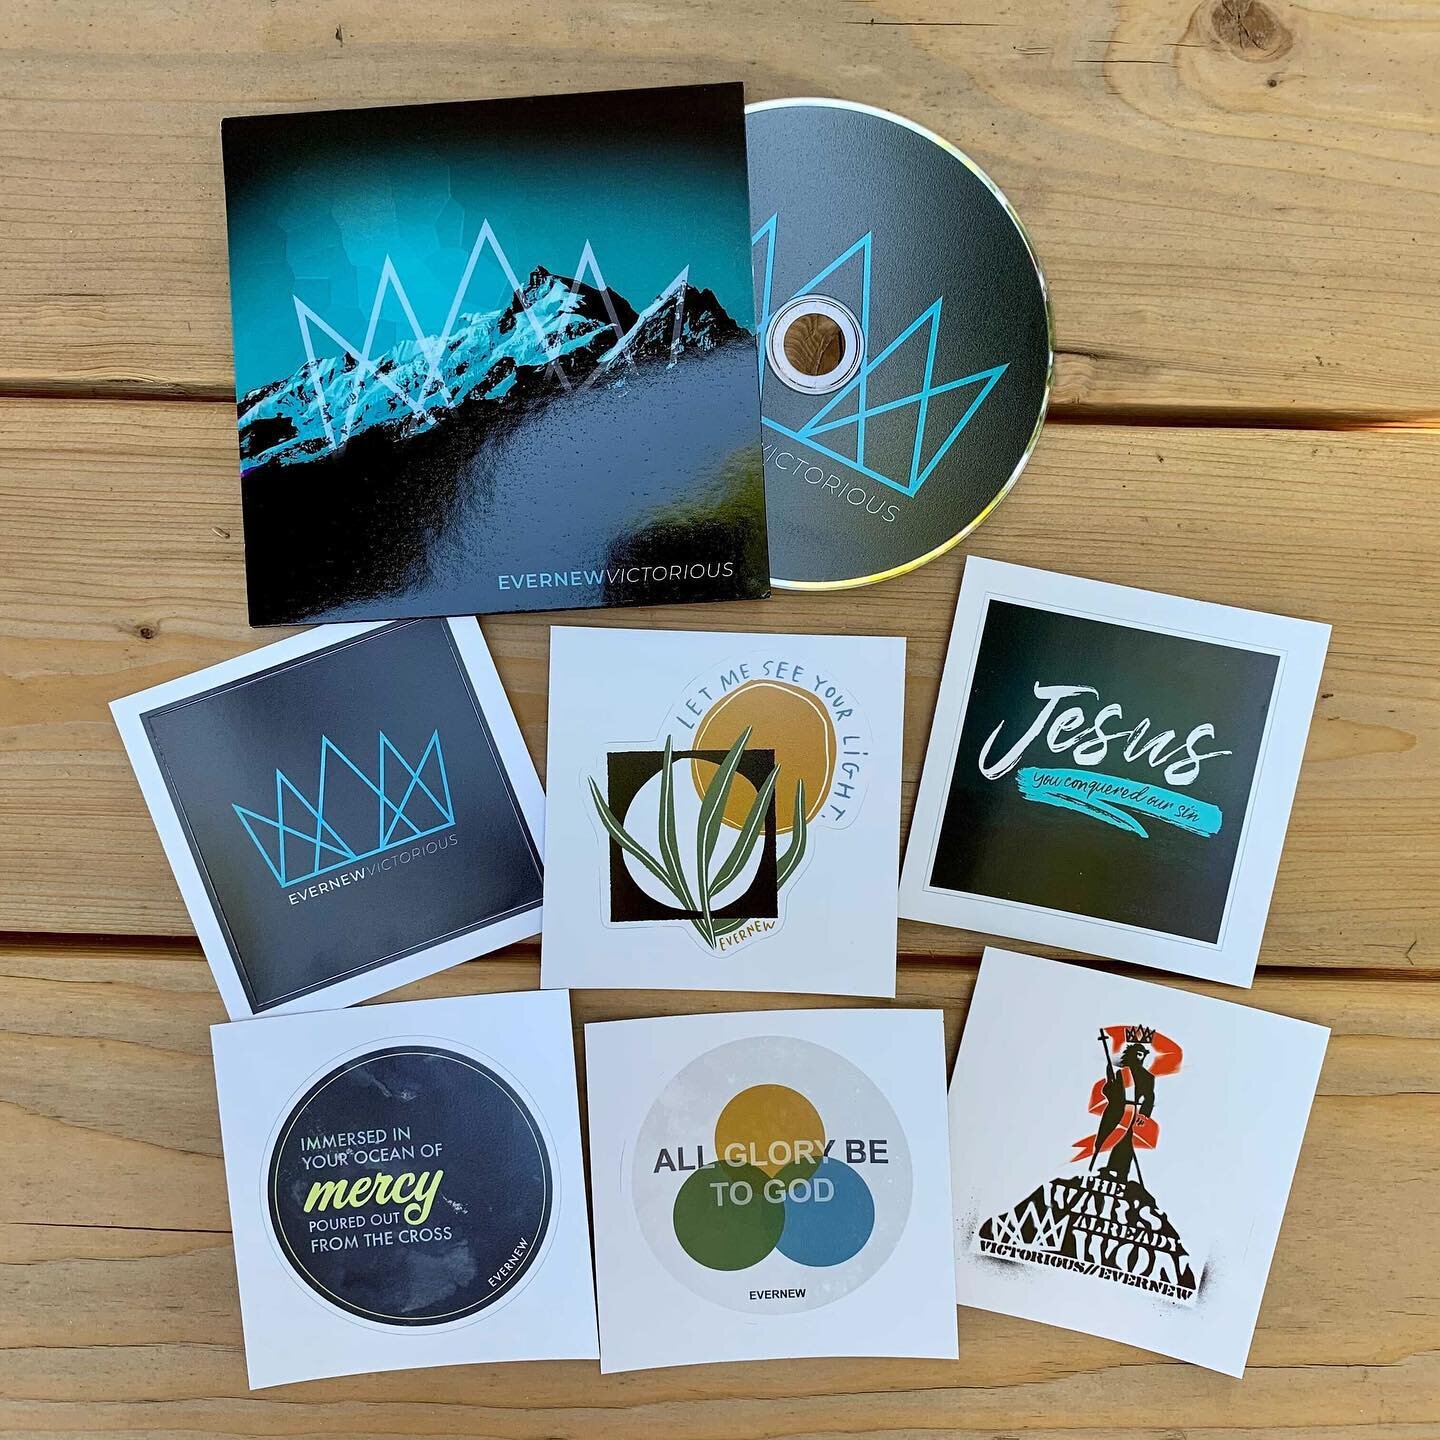 🌟 Celebrating ONE MONTH of our Victorious EP Release 🌟
 
💥 Buy our Victorious EP (physical CD) and get a FREE sticker of your choice!! [$10 value for only $6]

💥 Buy all 6 stickers, and get a FREE Victorious EP (physical CD)!! [$30 value for only